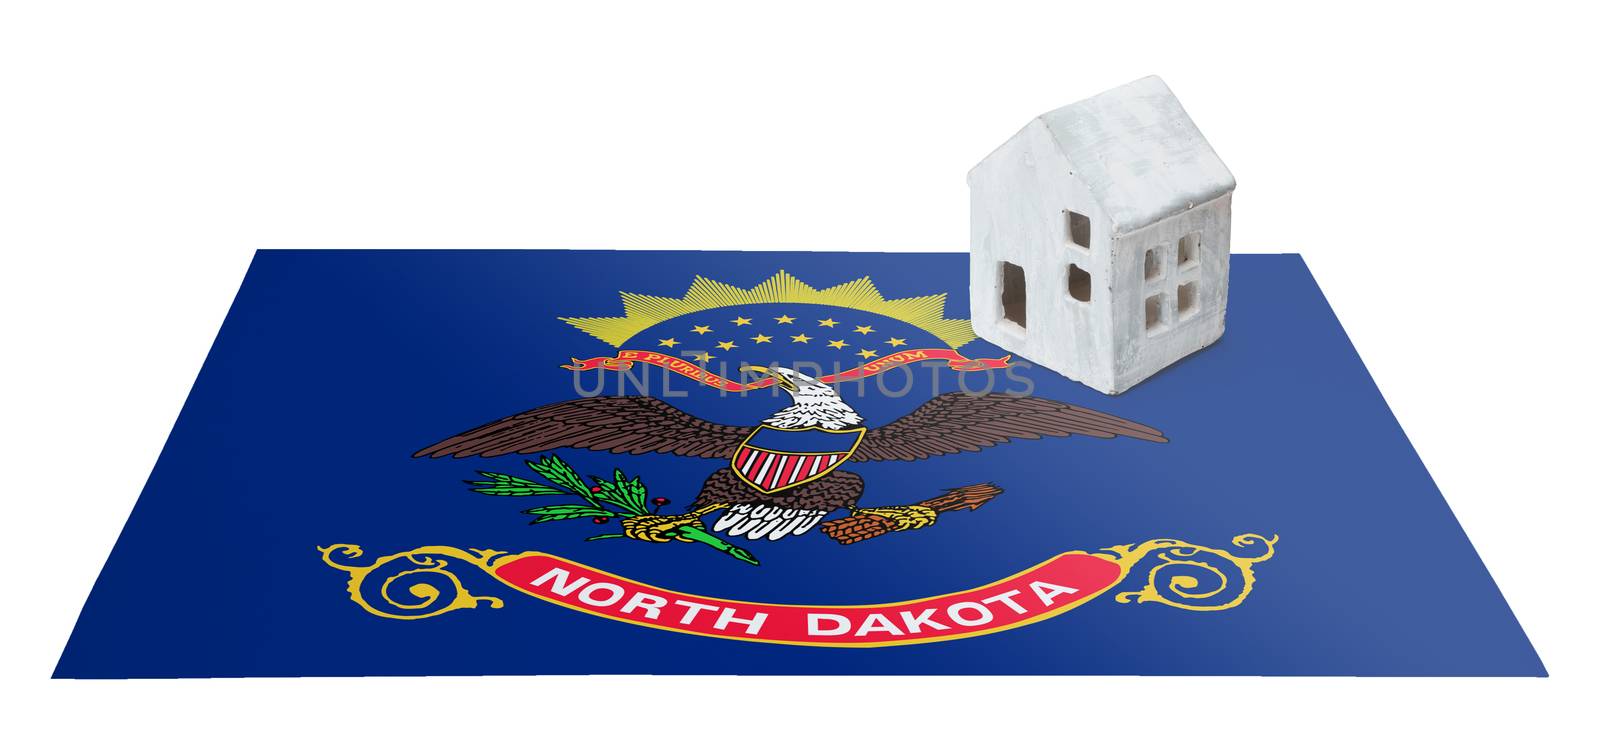 Small house on a flag - North Dakota by michaklootwijk